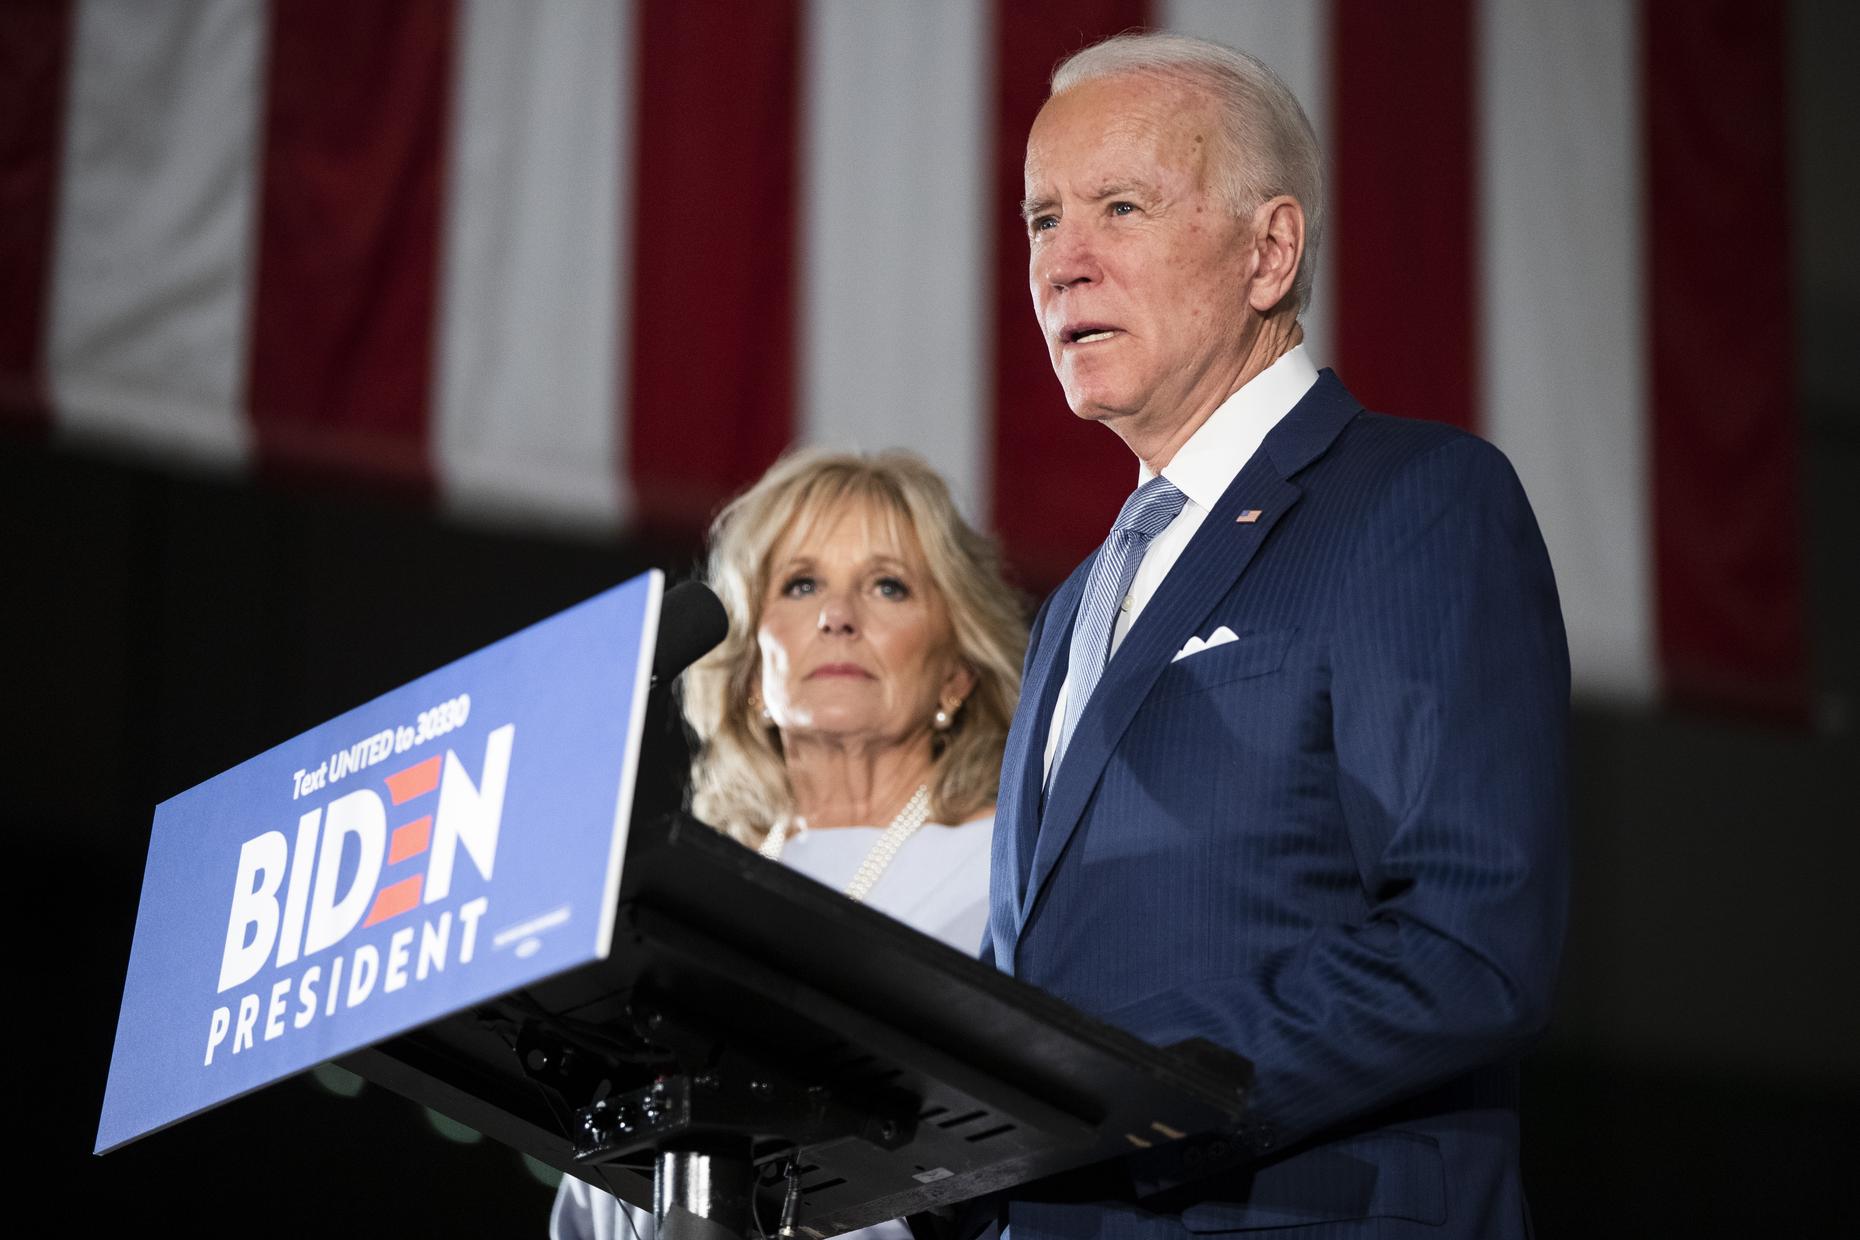 Primary Results Are In and Joe Biden Leads | The Takeaway ...